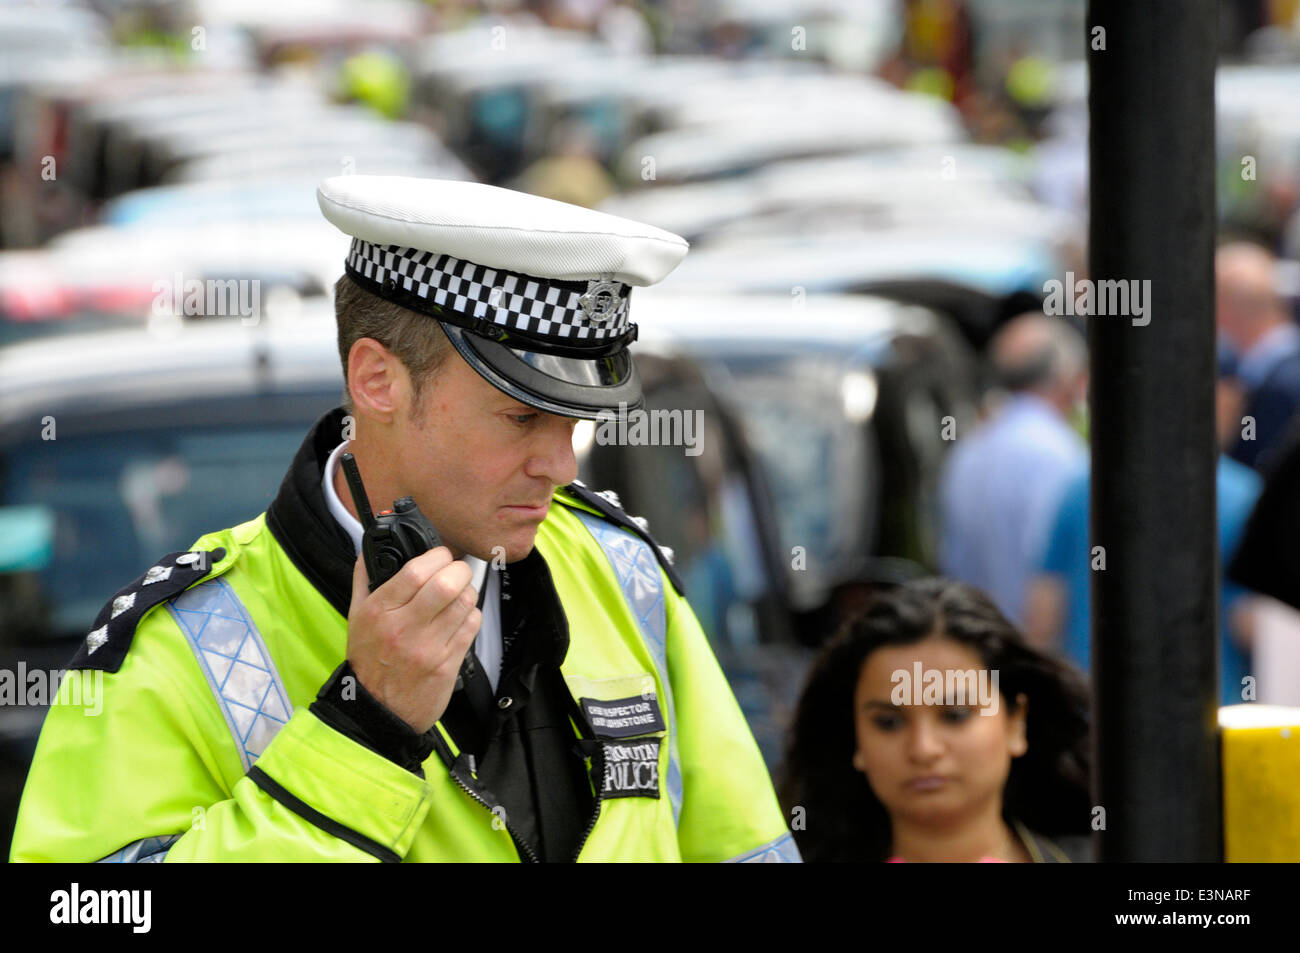 London, England, UK. Metropolitan police Chief Inspector on duty during a taxi drivers' protest in central London, June 11 2014 Stock Photo